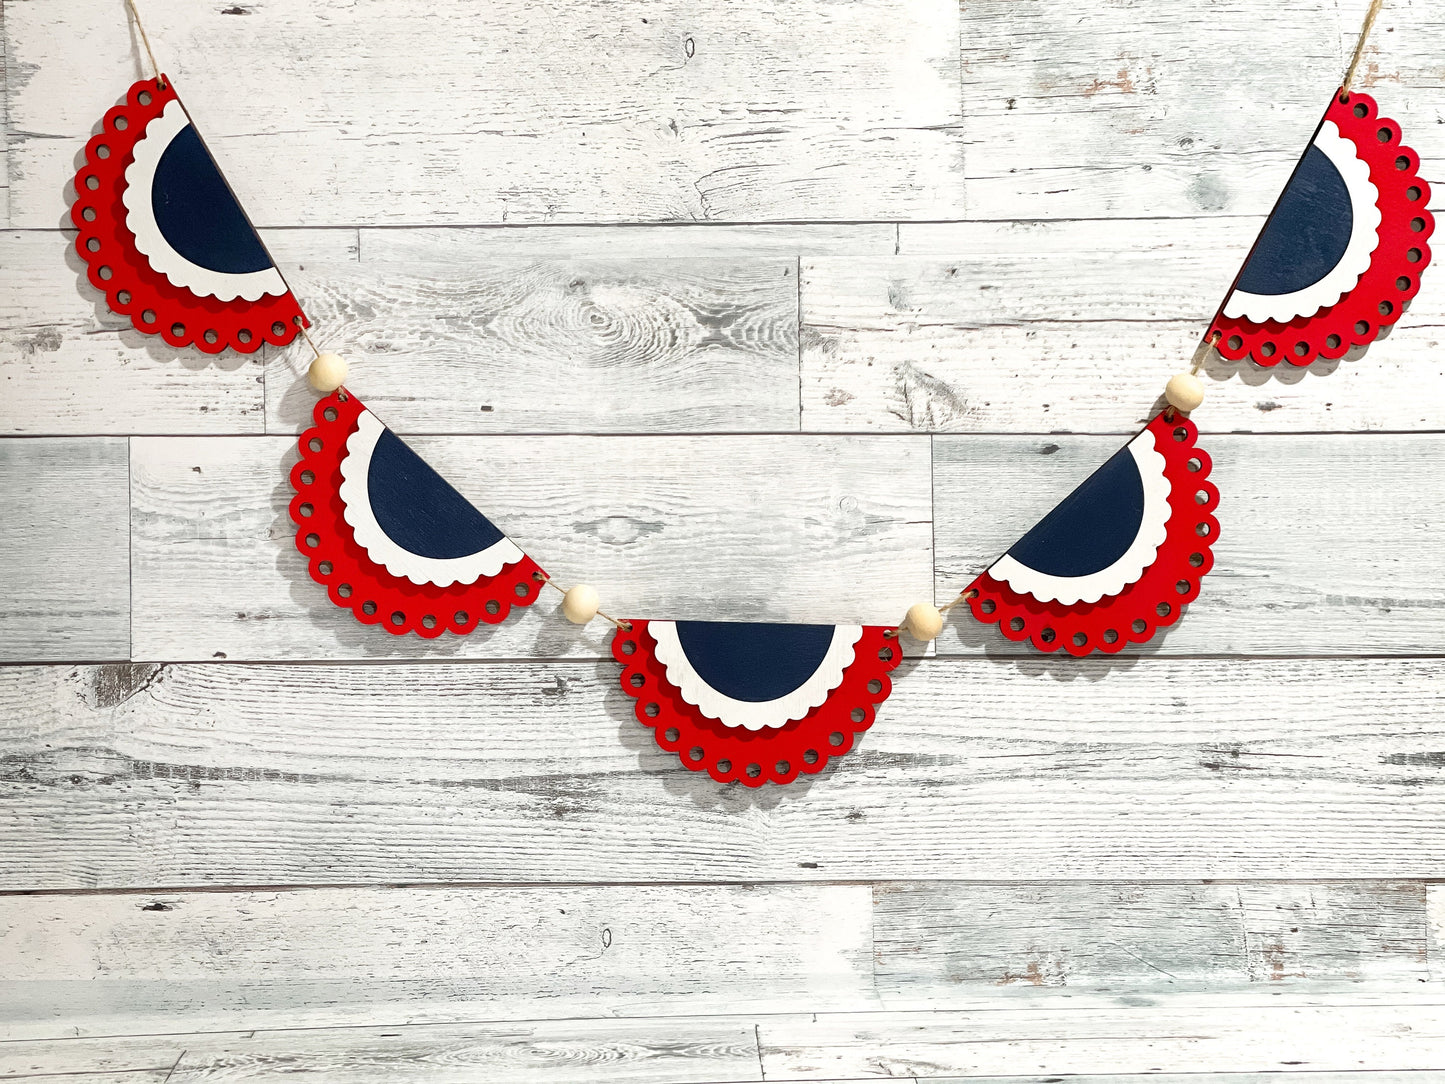 Patriotic Bunting Banner - 4th of July Decor - Red White and Blue Centerpiece - Independence Day Decorations - Wood Decor